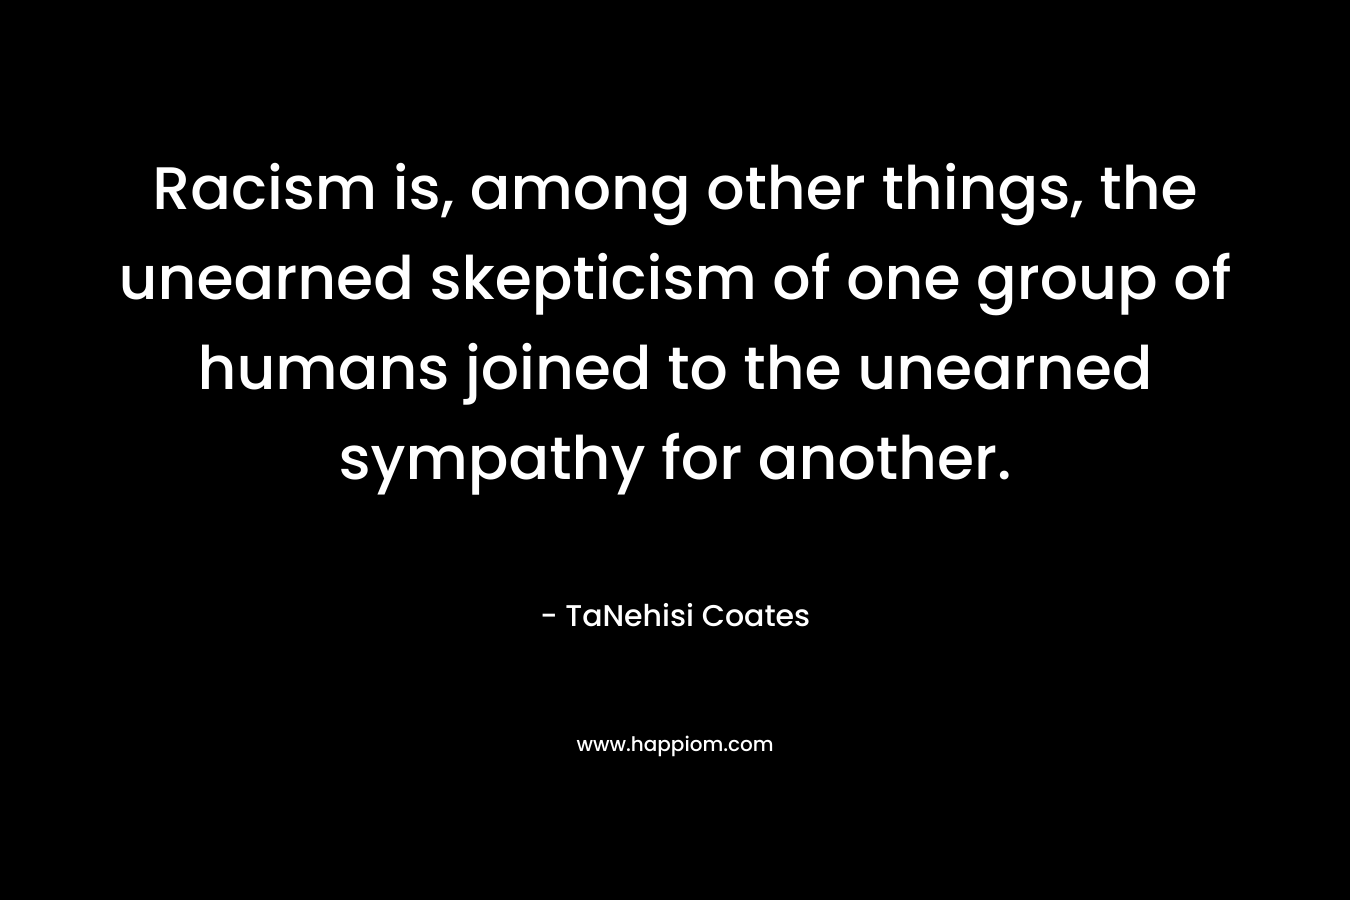 Racism is, among other things, the unearned skepticism of one group of humans joined to the unearned sympathy for another.